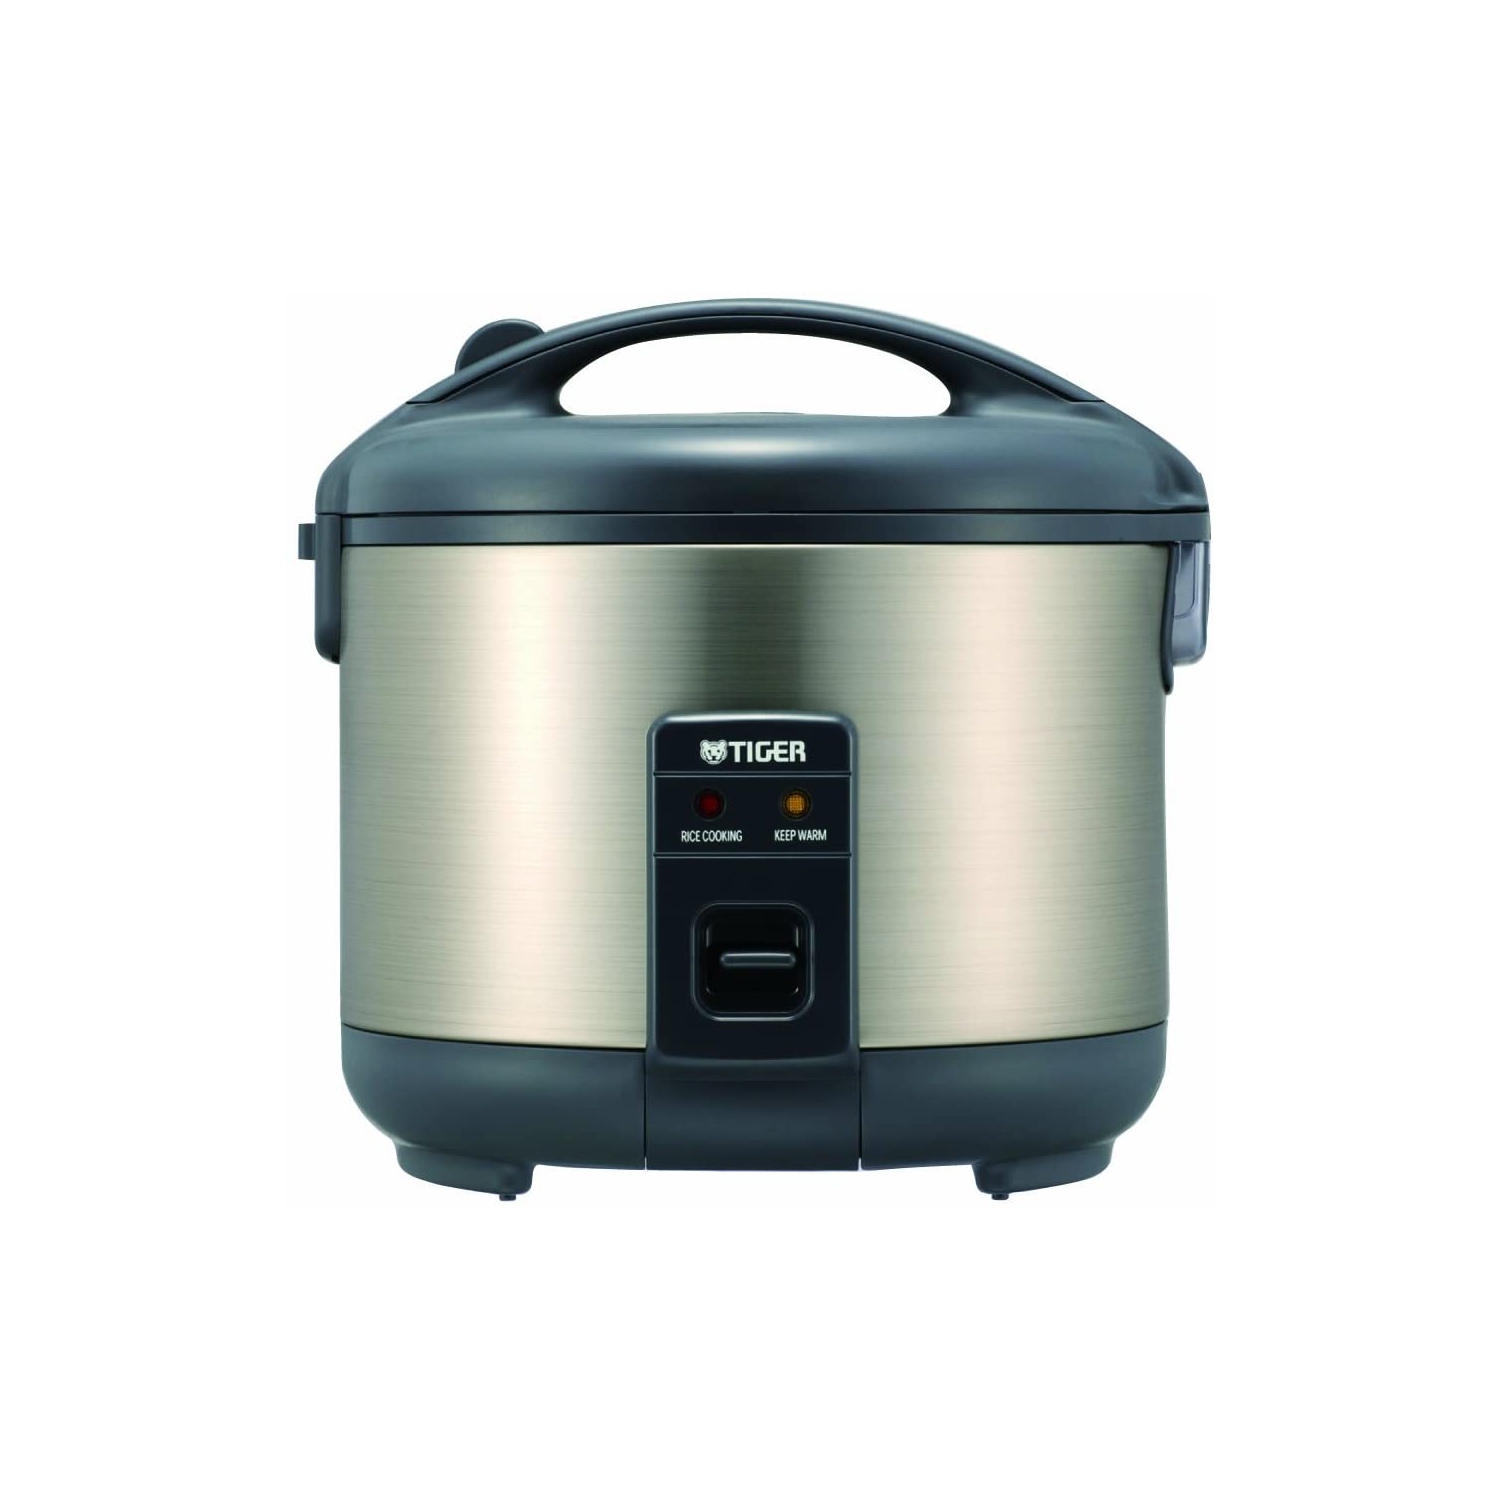 Tiger JNP-S18U Stainless Steel Conventional Rice Cooker, 10 Cups - Made in Japan